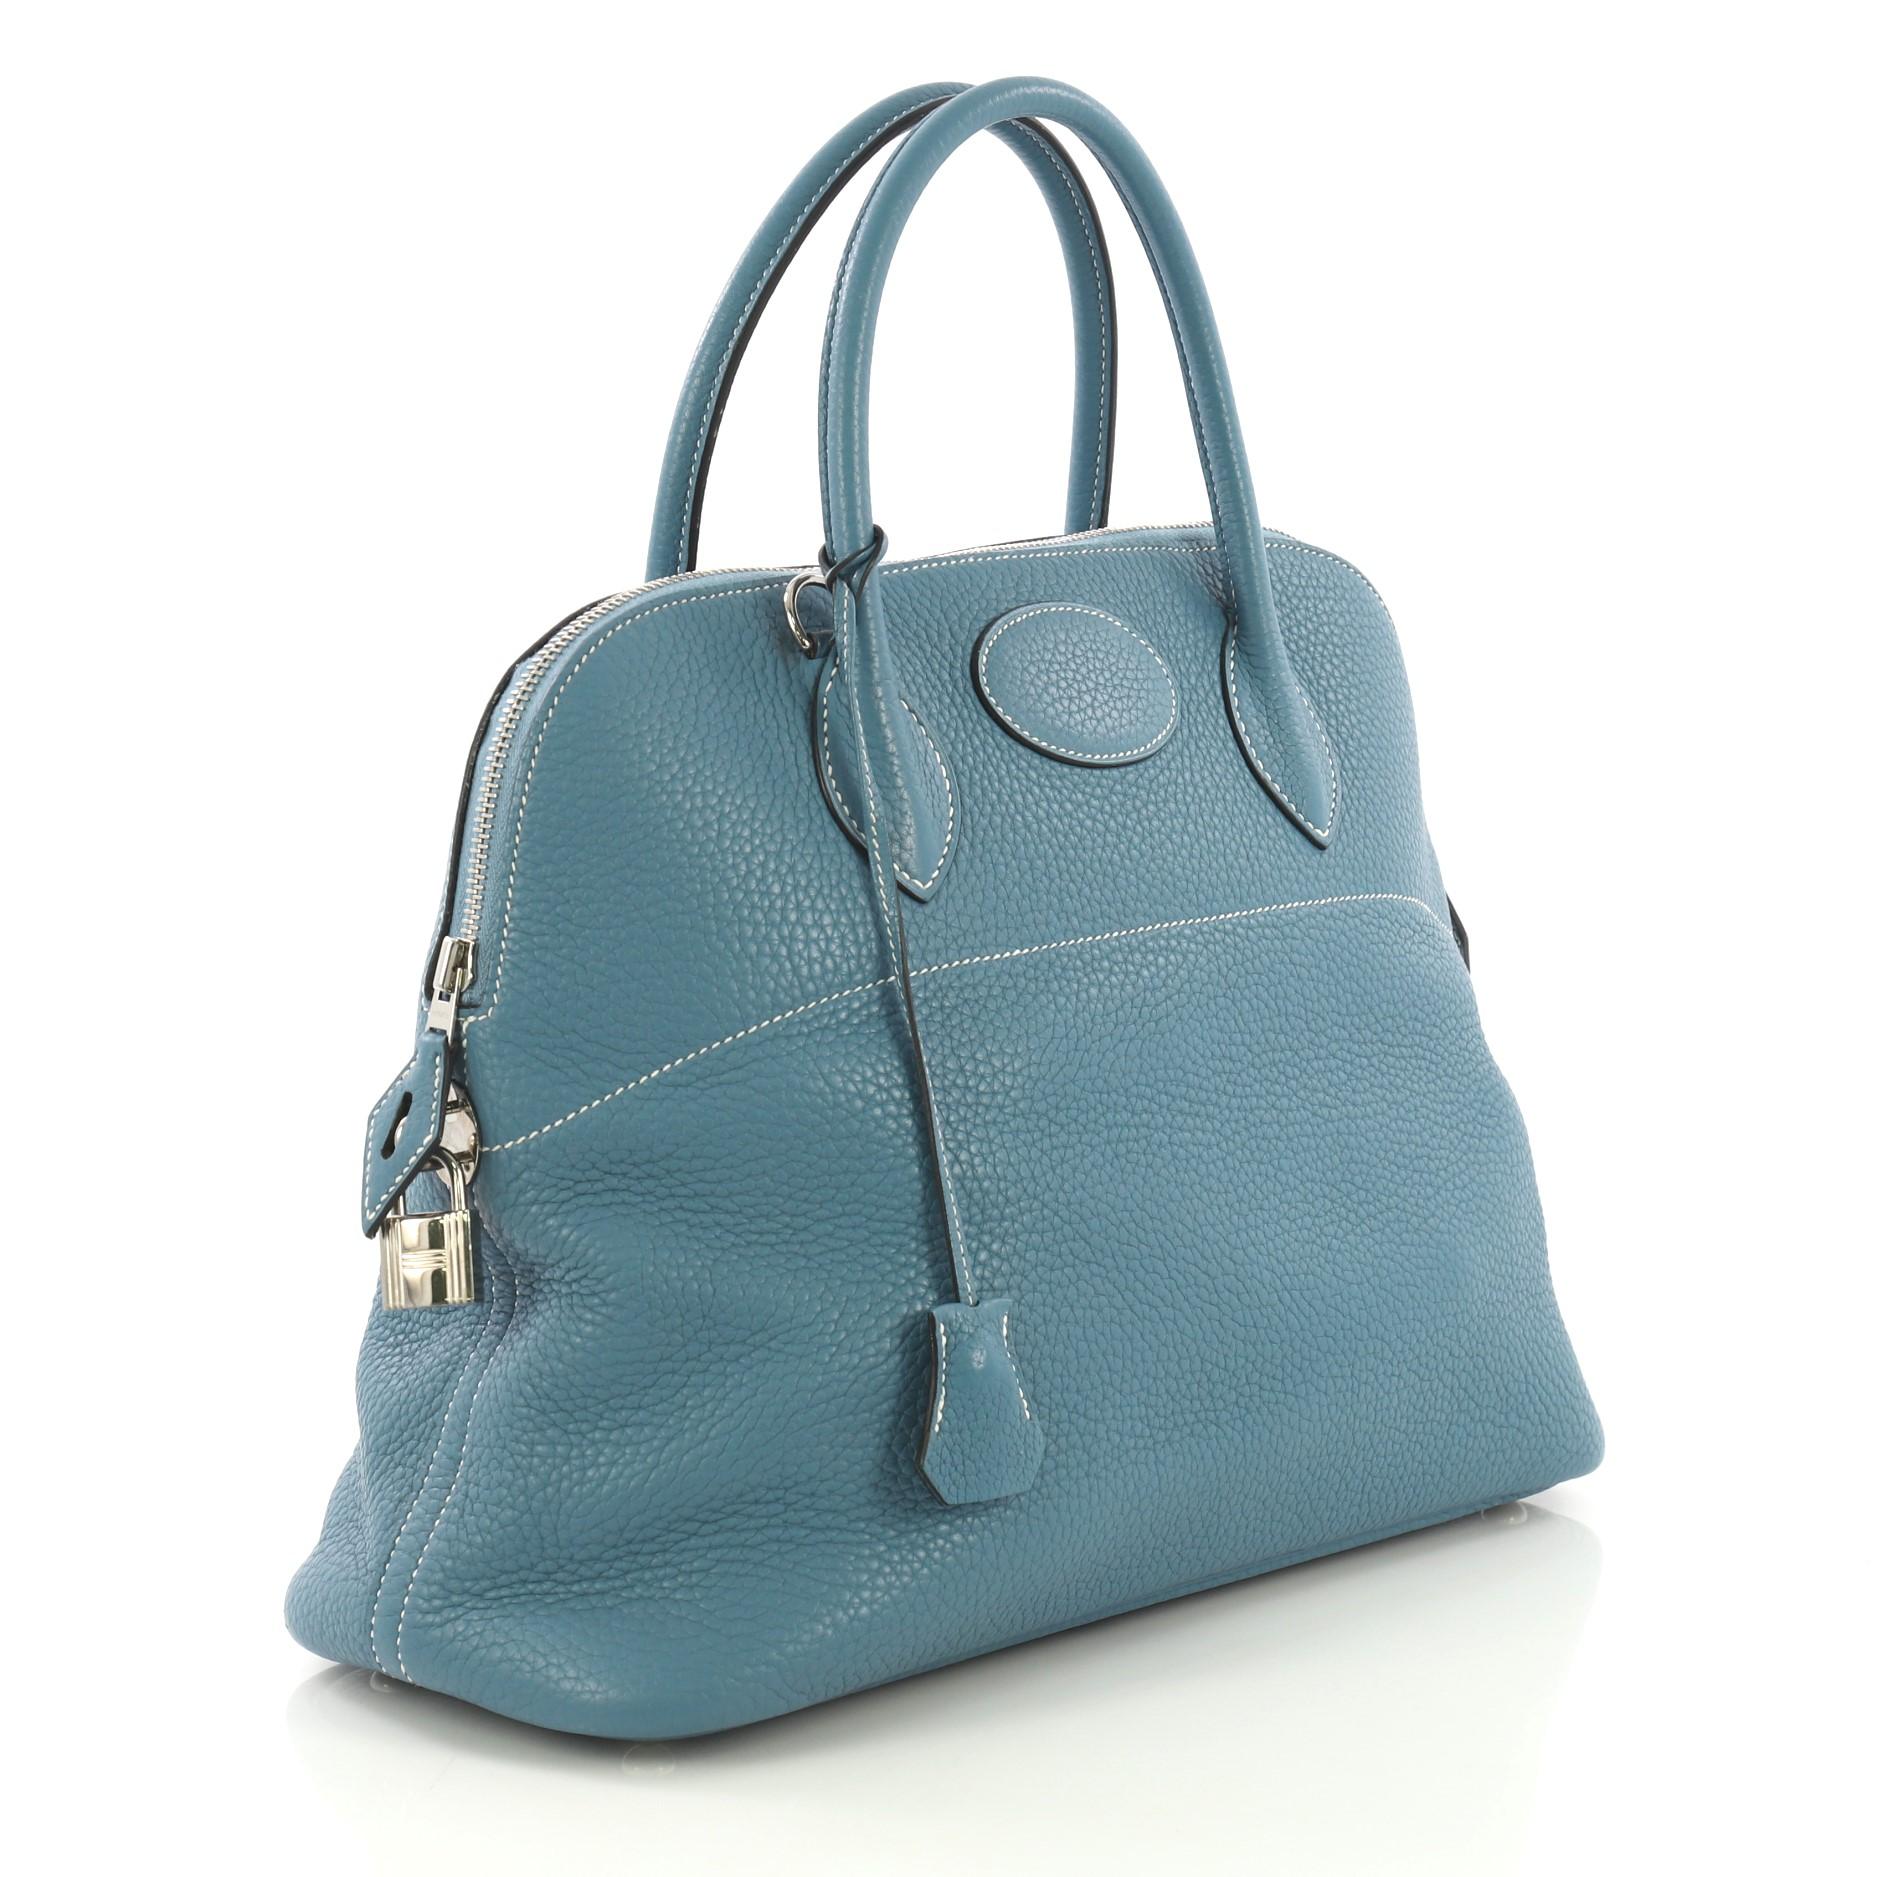 This Hermes Bolide Handbag Clemence 31, crafted from Bleu Jean blue Clemence leather, features dual rolled leather handles, protective base studs, side lock, and palladium hardware. Its zip closure opens to a Bleu Jean blue Agneau leather interior.